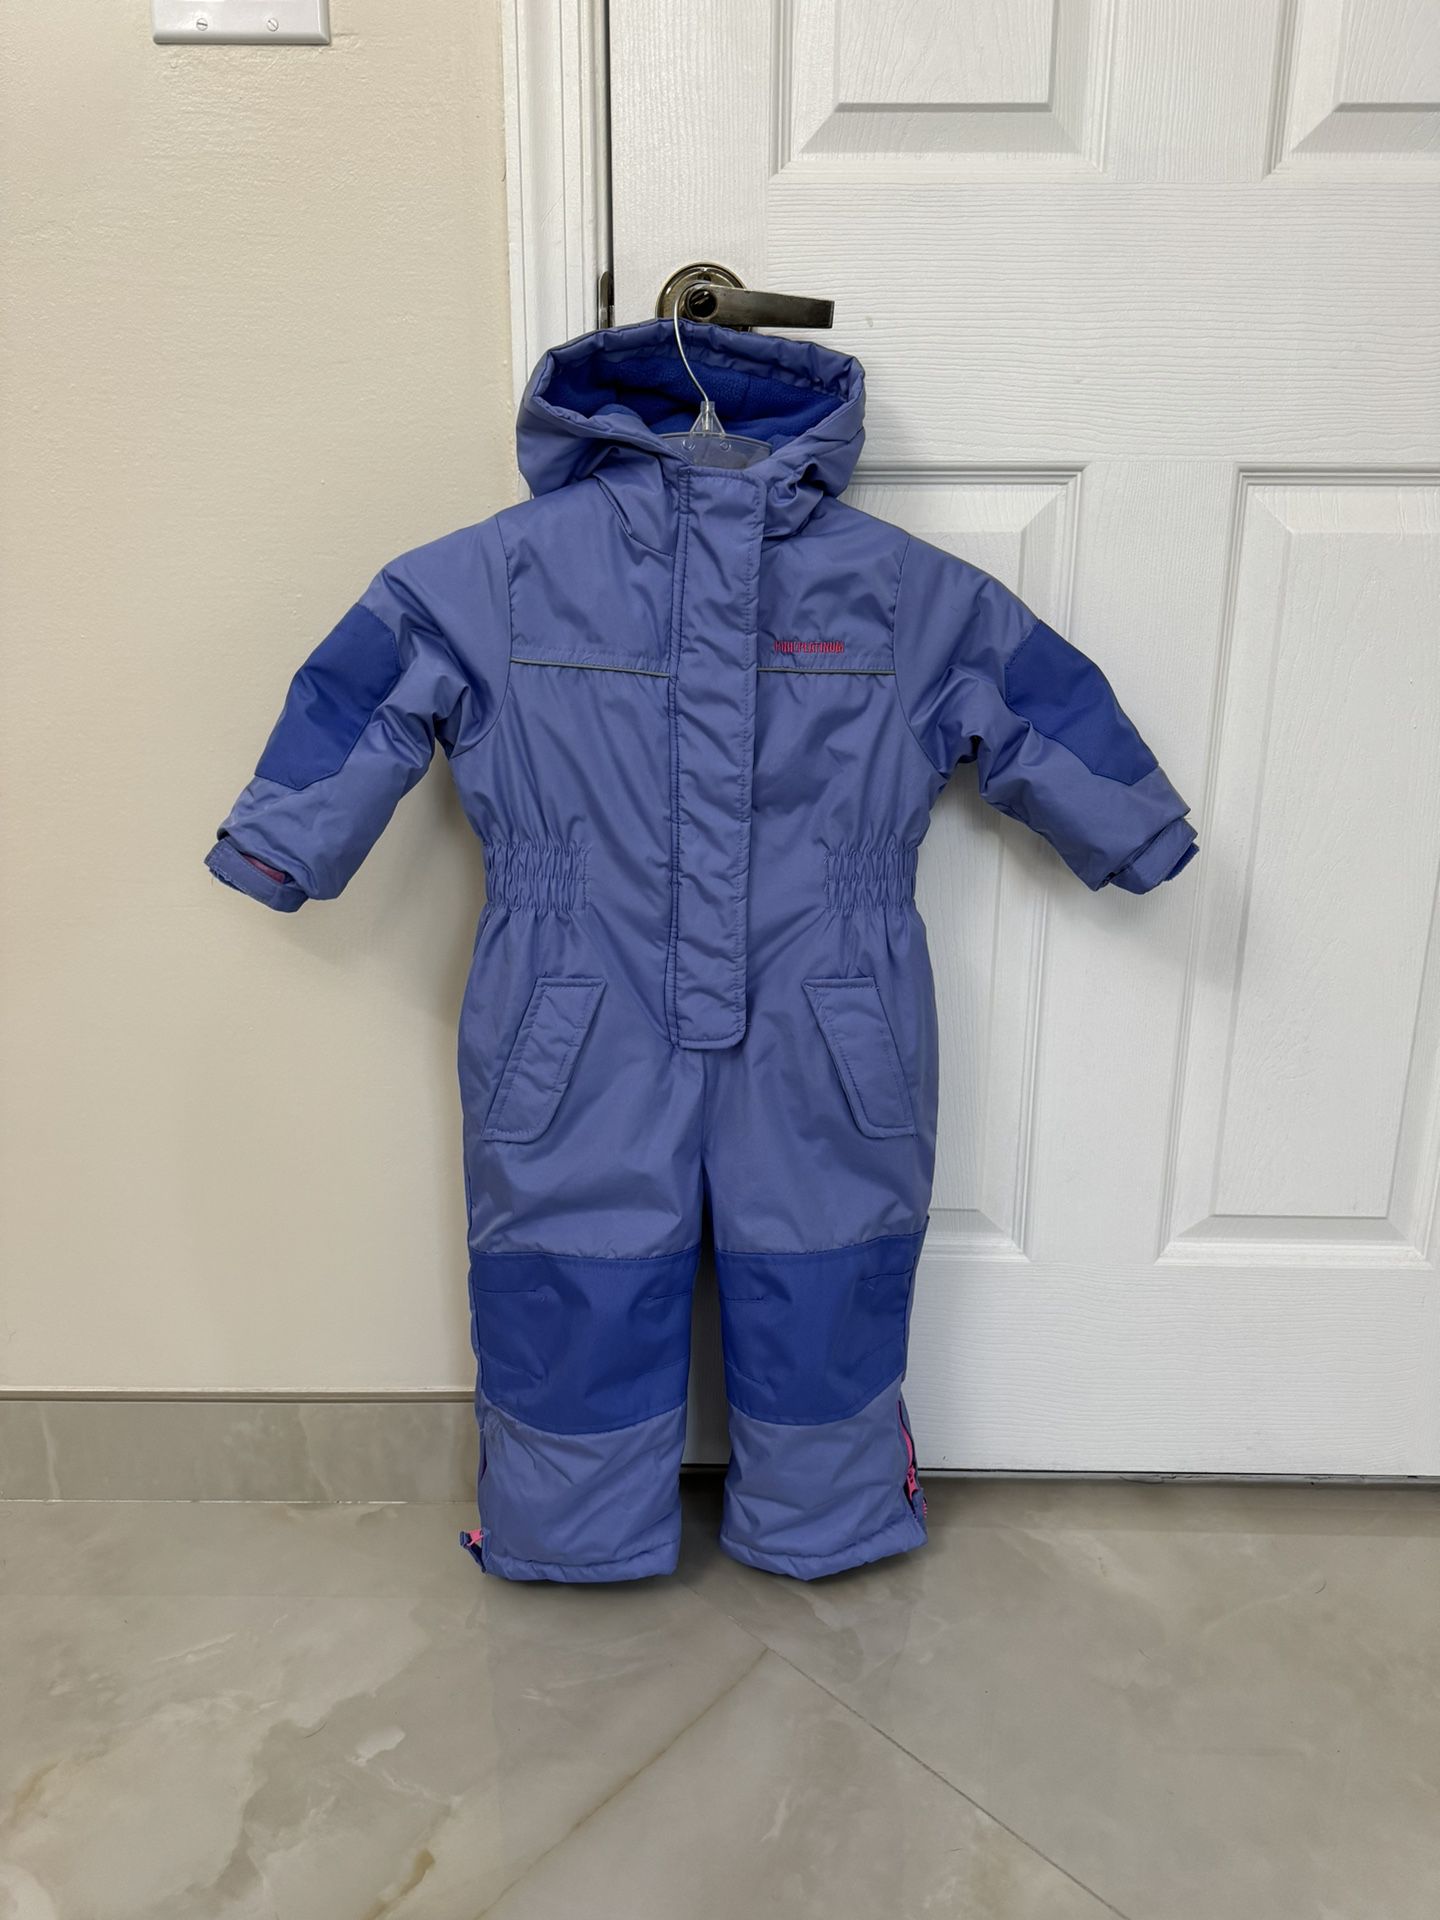 Toddler Size 2 Toddle Girl Or Boy , Pink Platinum Brand Heavy Winter One Piece Snowsuit Like New Condition In Weston